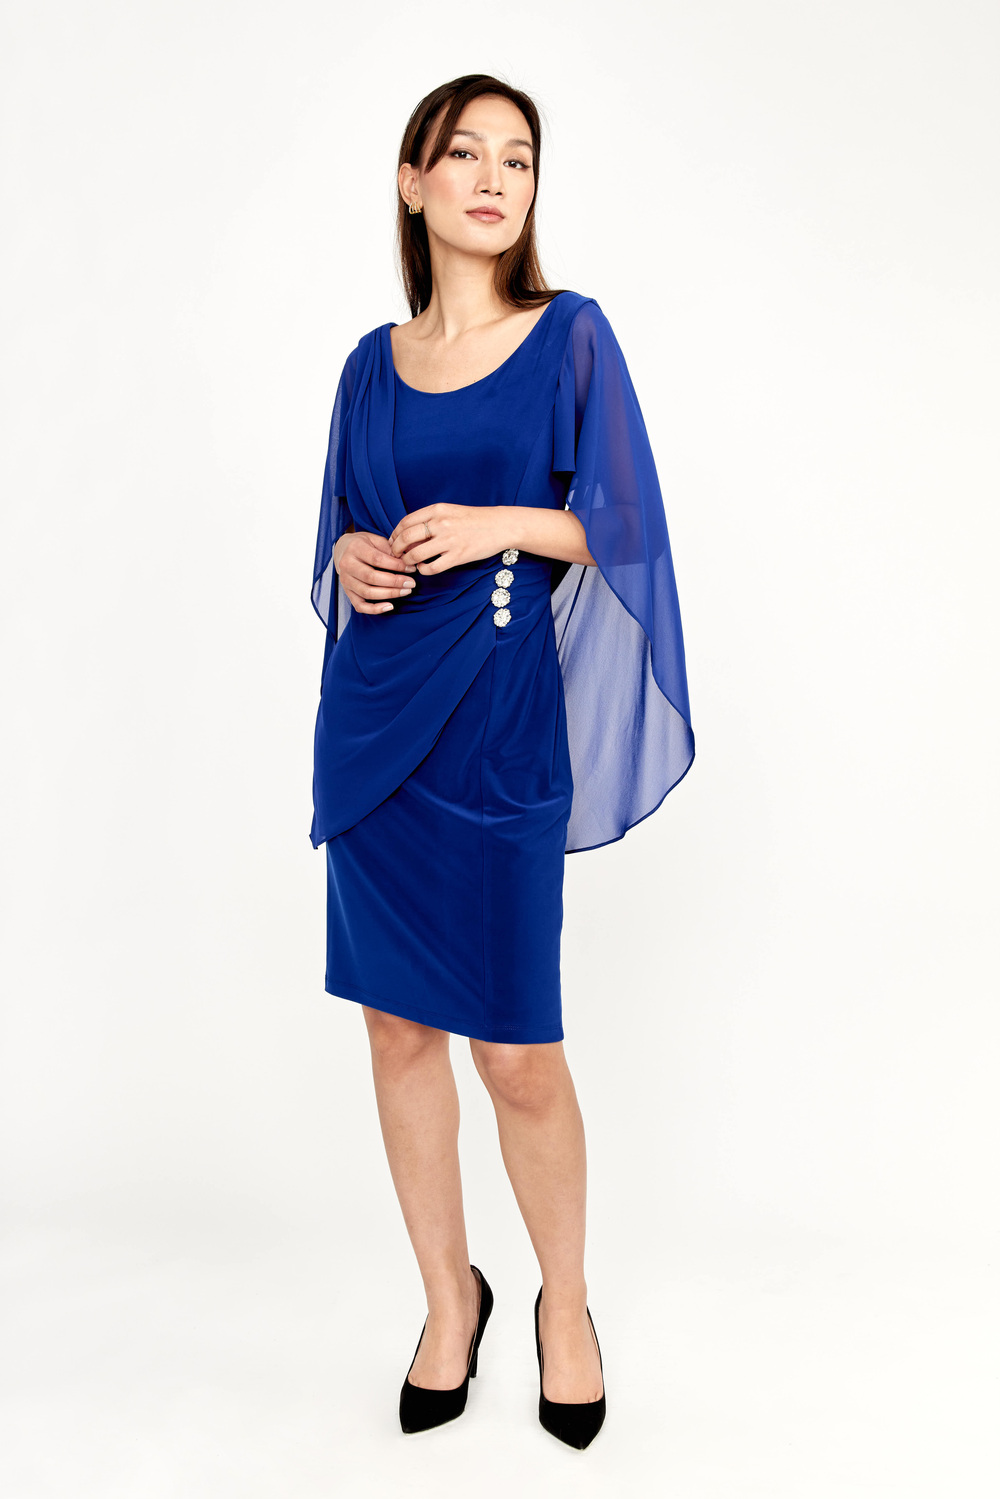 Ruched Sheath Dress Style 209228. Imperial Blue